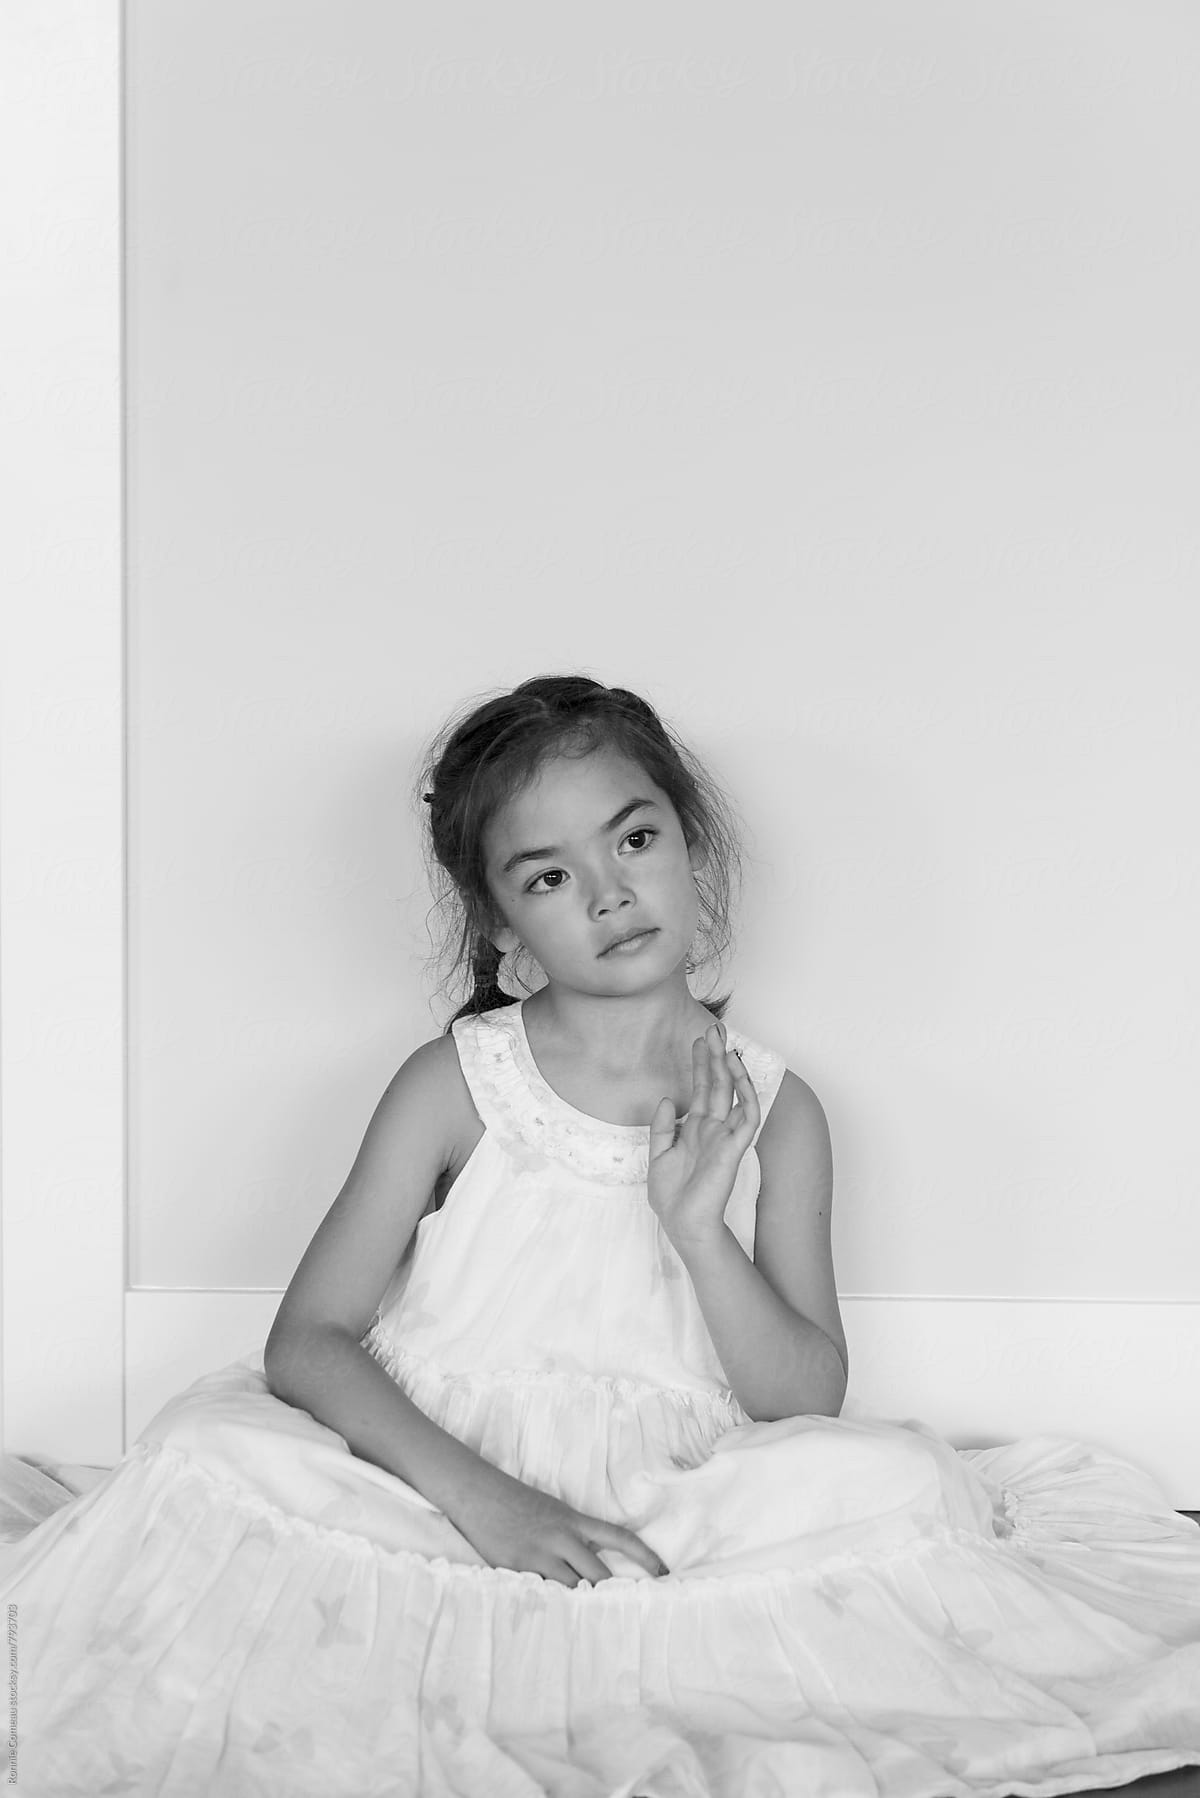 Little Girl In White Dress At Home